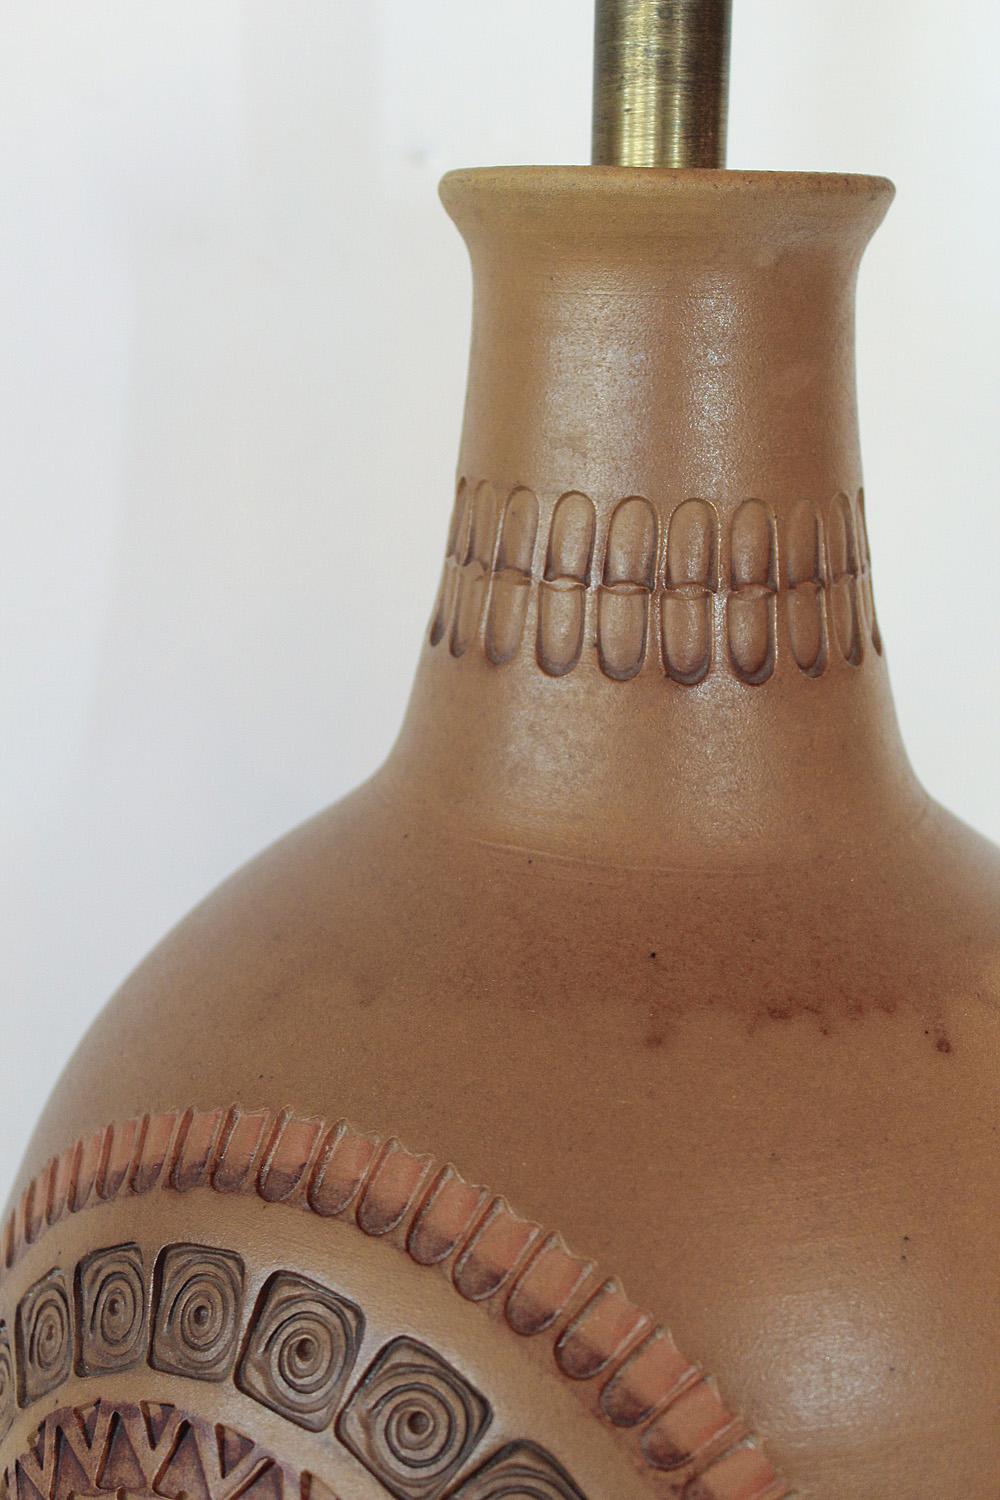 Mid-Century Modern Large Yellow, Rust, and Brown Bitossi Ceramic Lamp, 1960s Italy For Sale